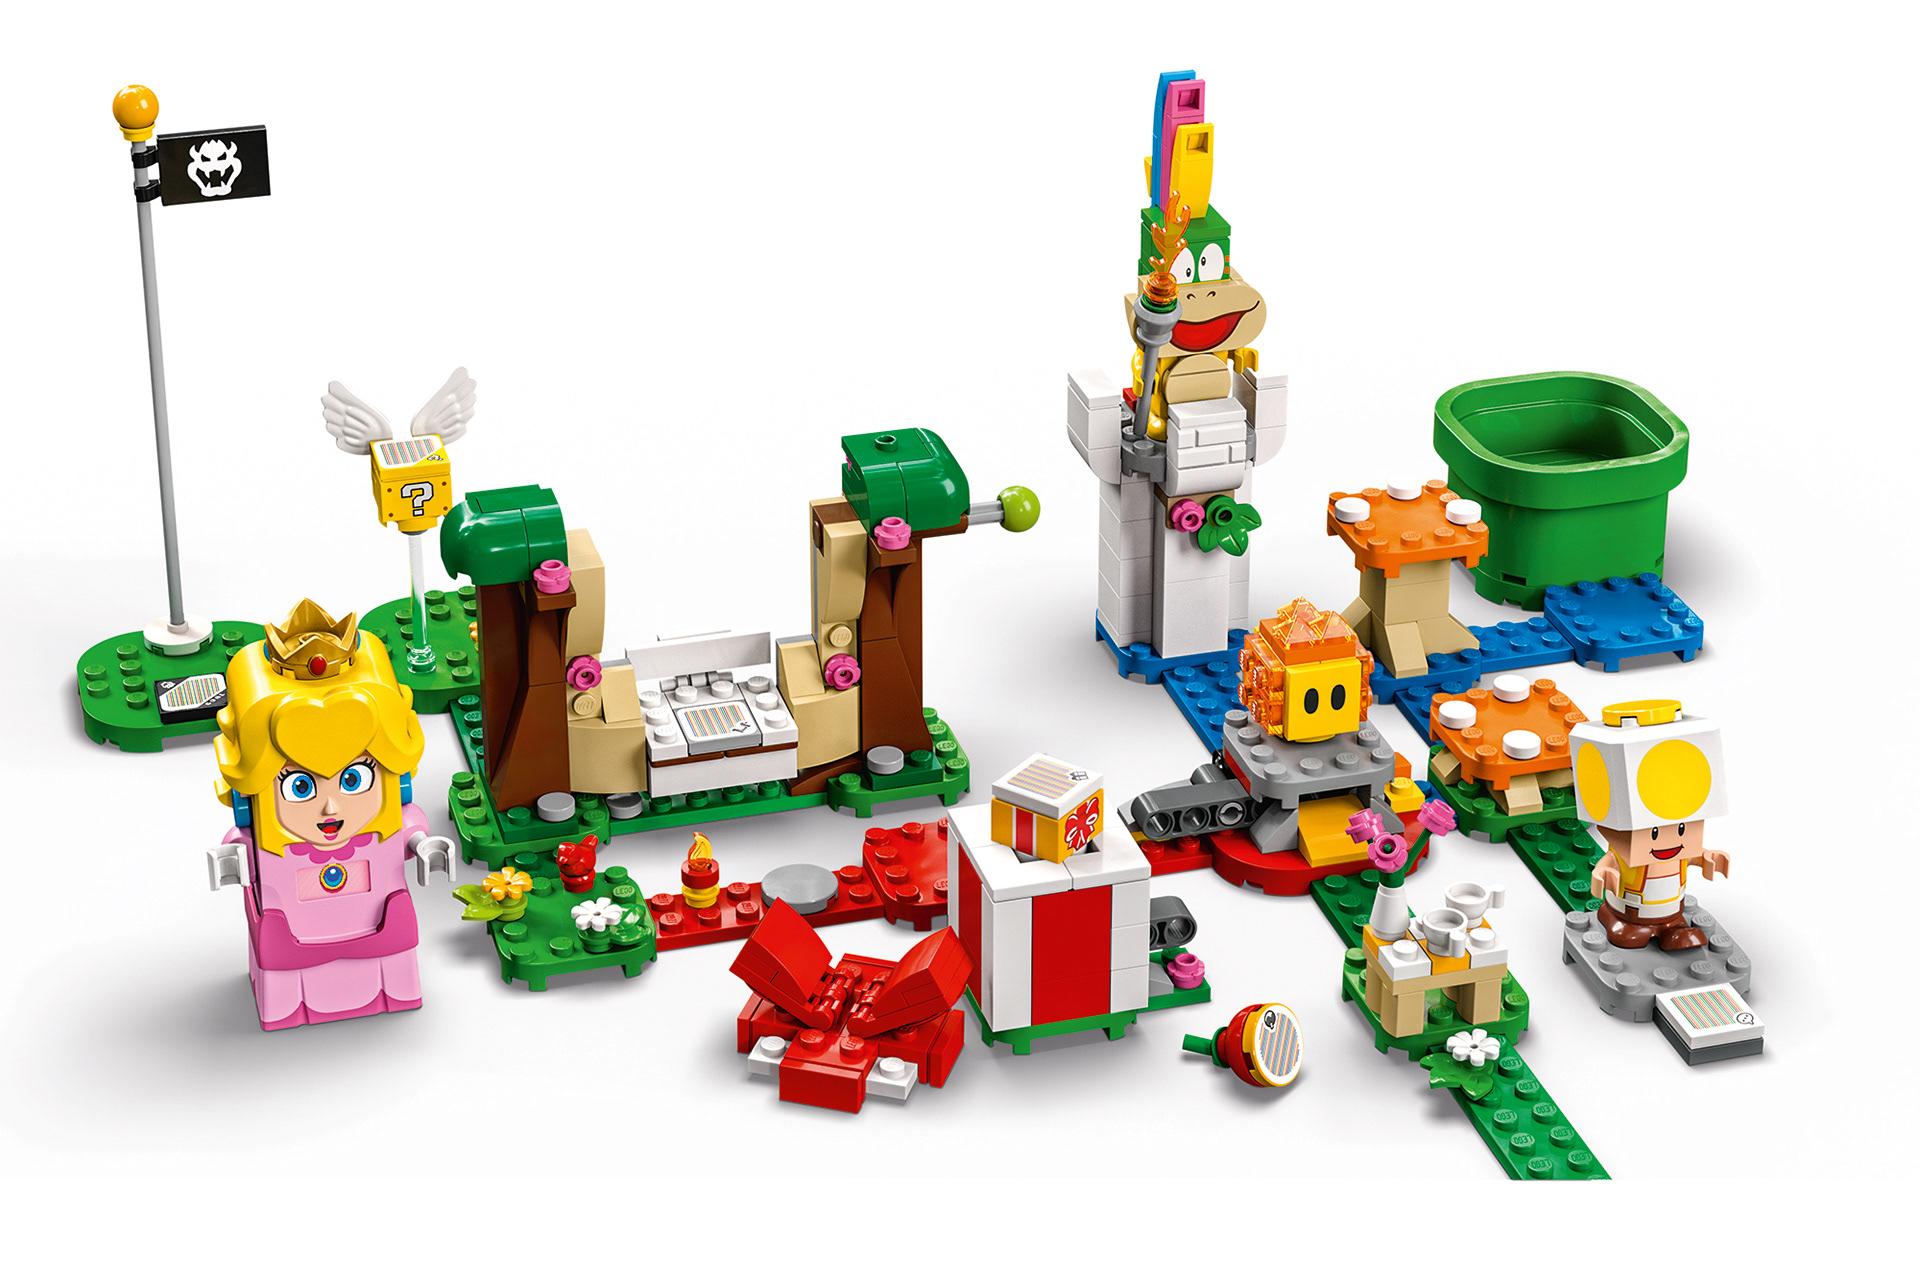 LEGO Super Mario Brings Physical and Virtual Play Together - Nerdist